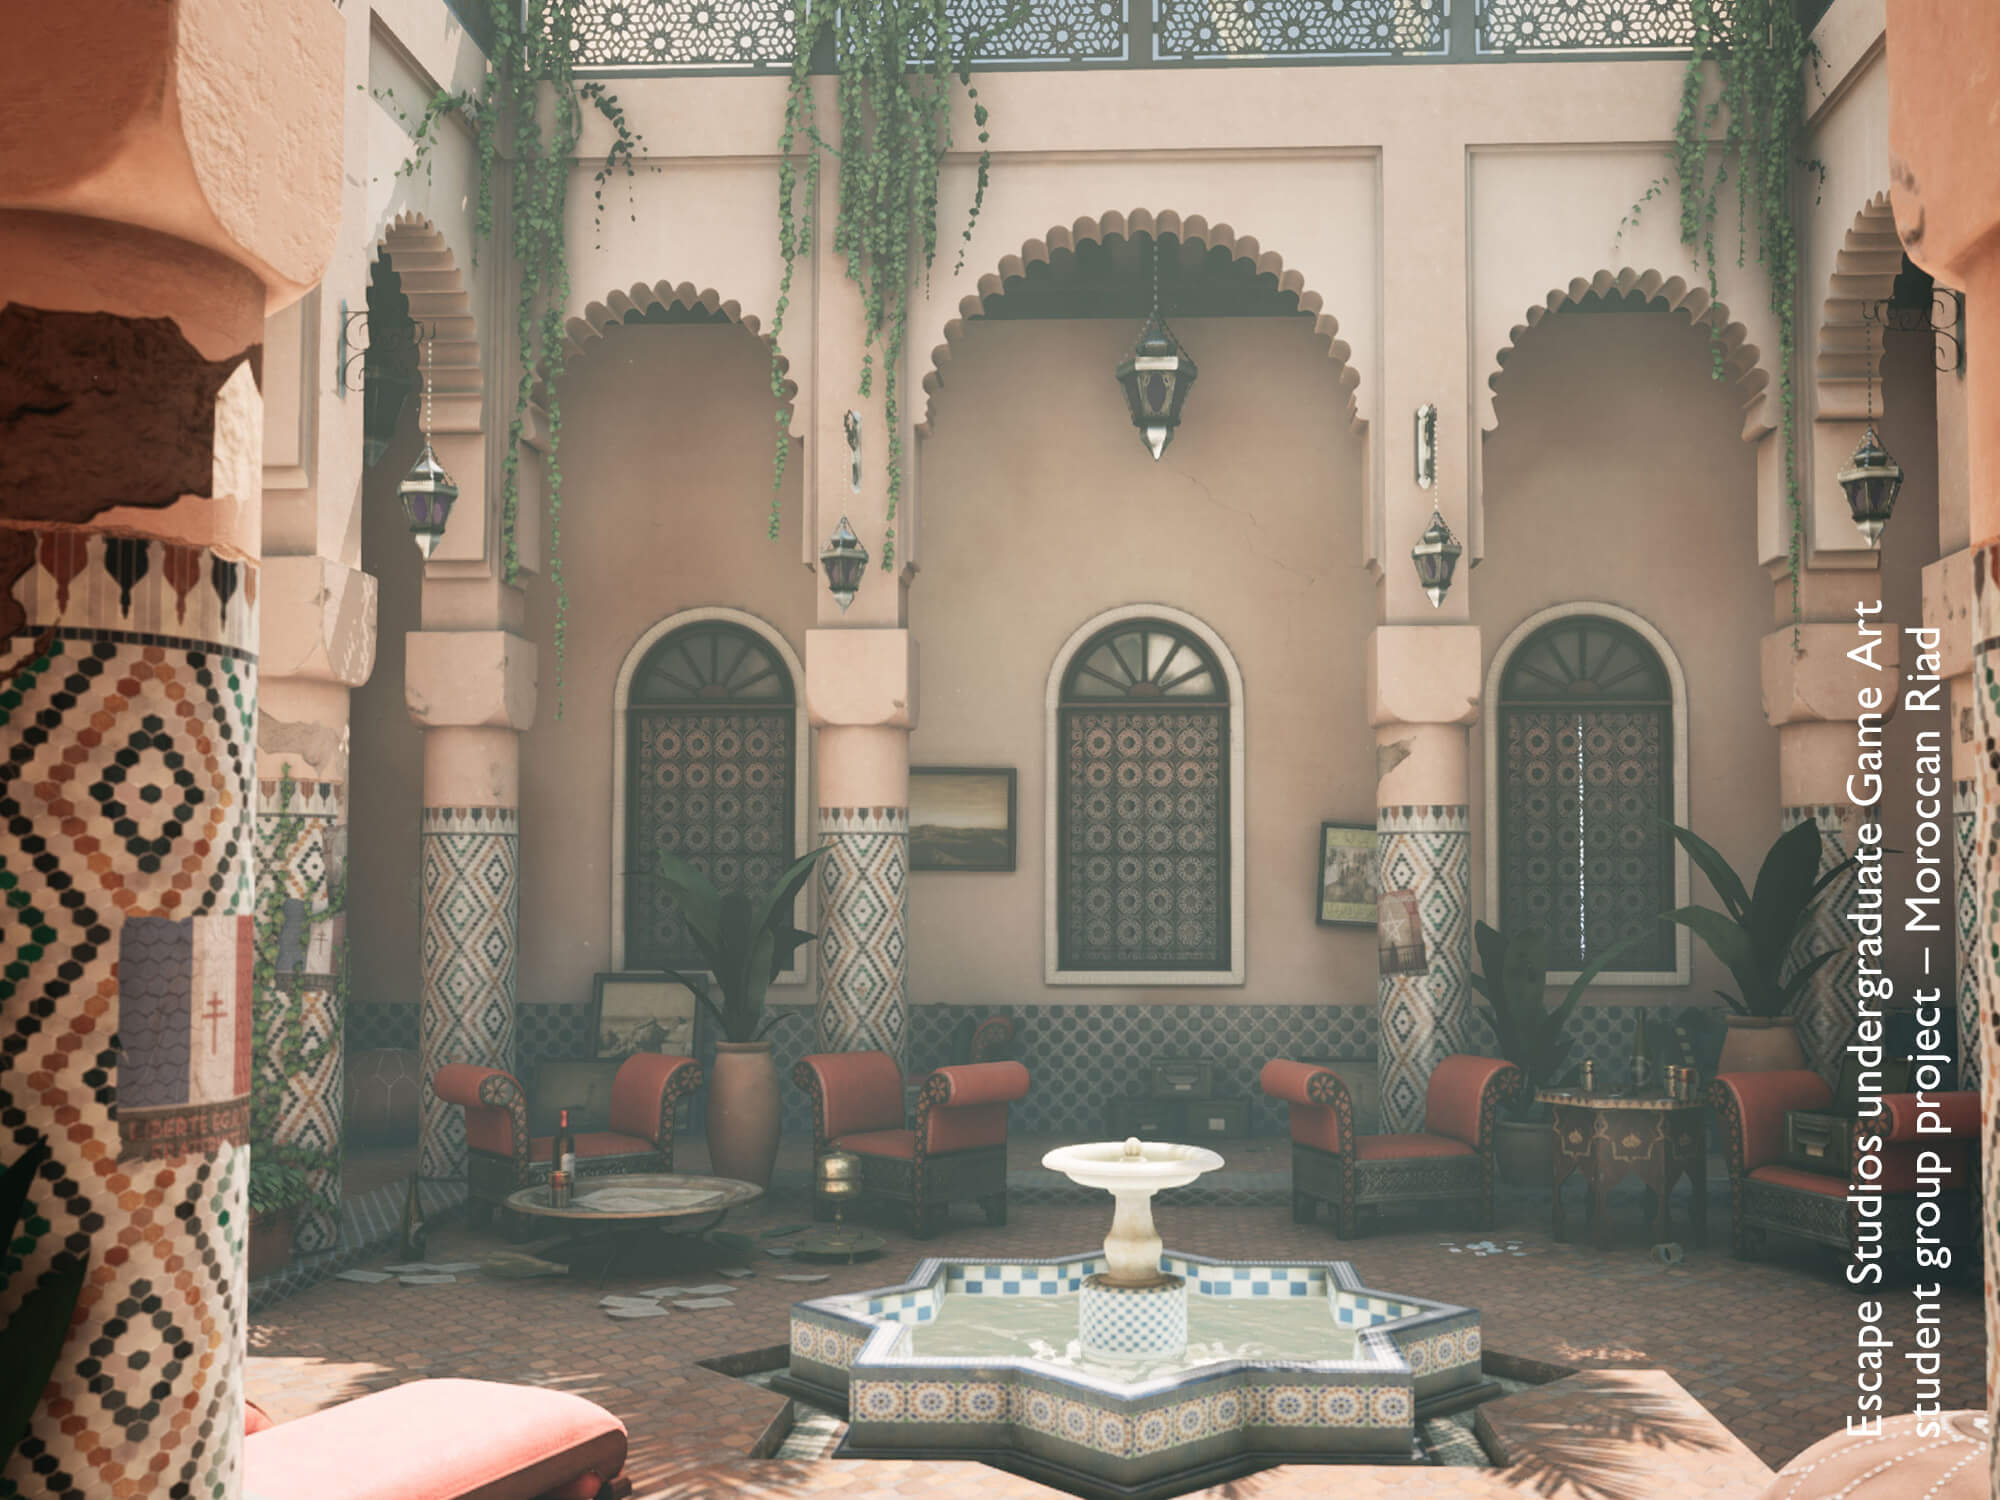 Game environment scene of a Moroccan riad